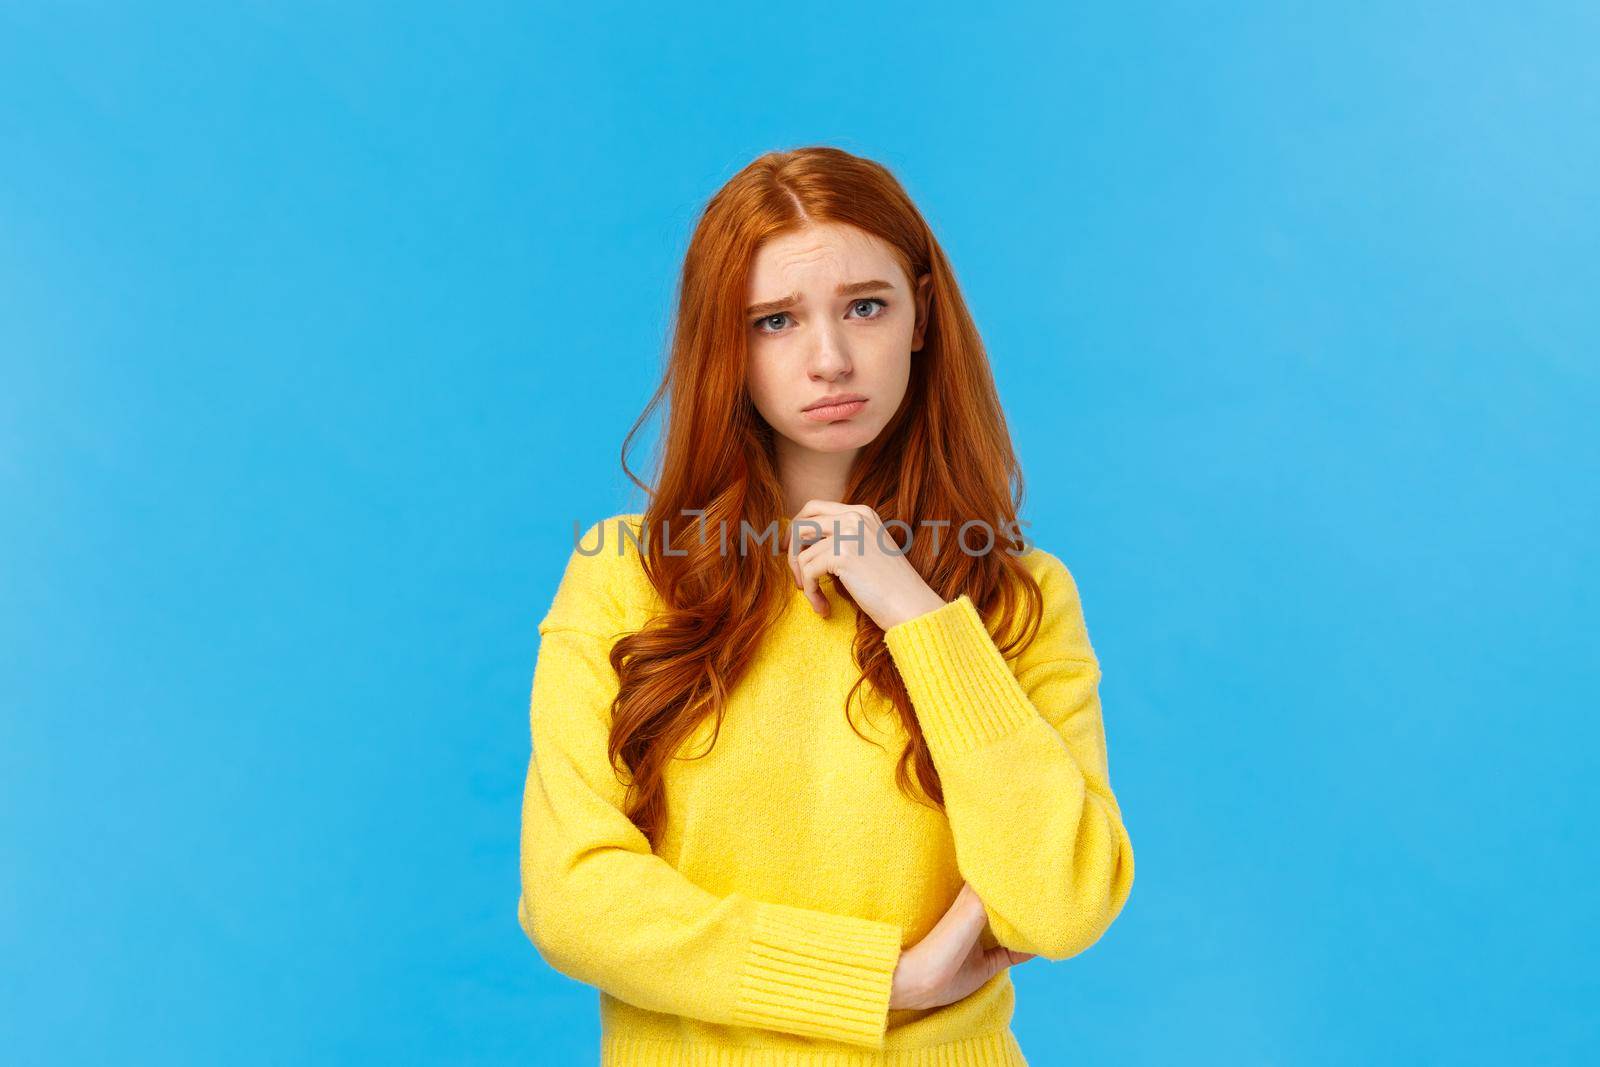 Upset redhead girl showing empathy, pity for friend hearing sad news, frowning and sulking feeling uneasy for person got in trouble, standing over blue background distressed or depressed.